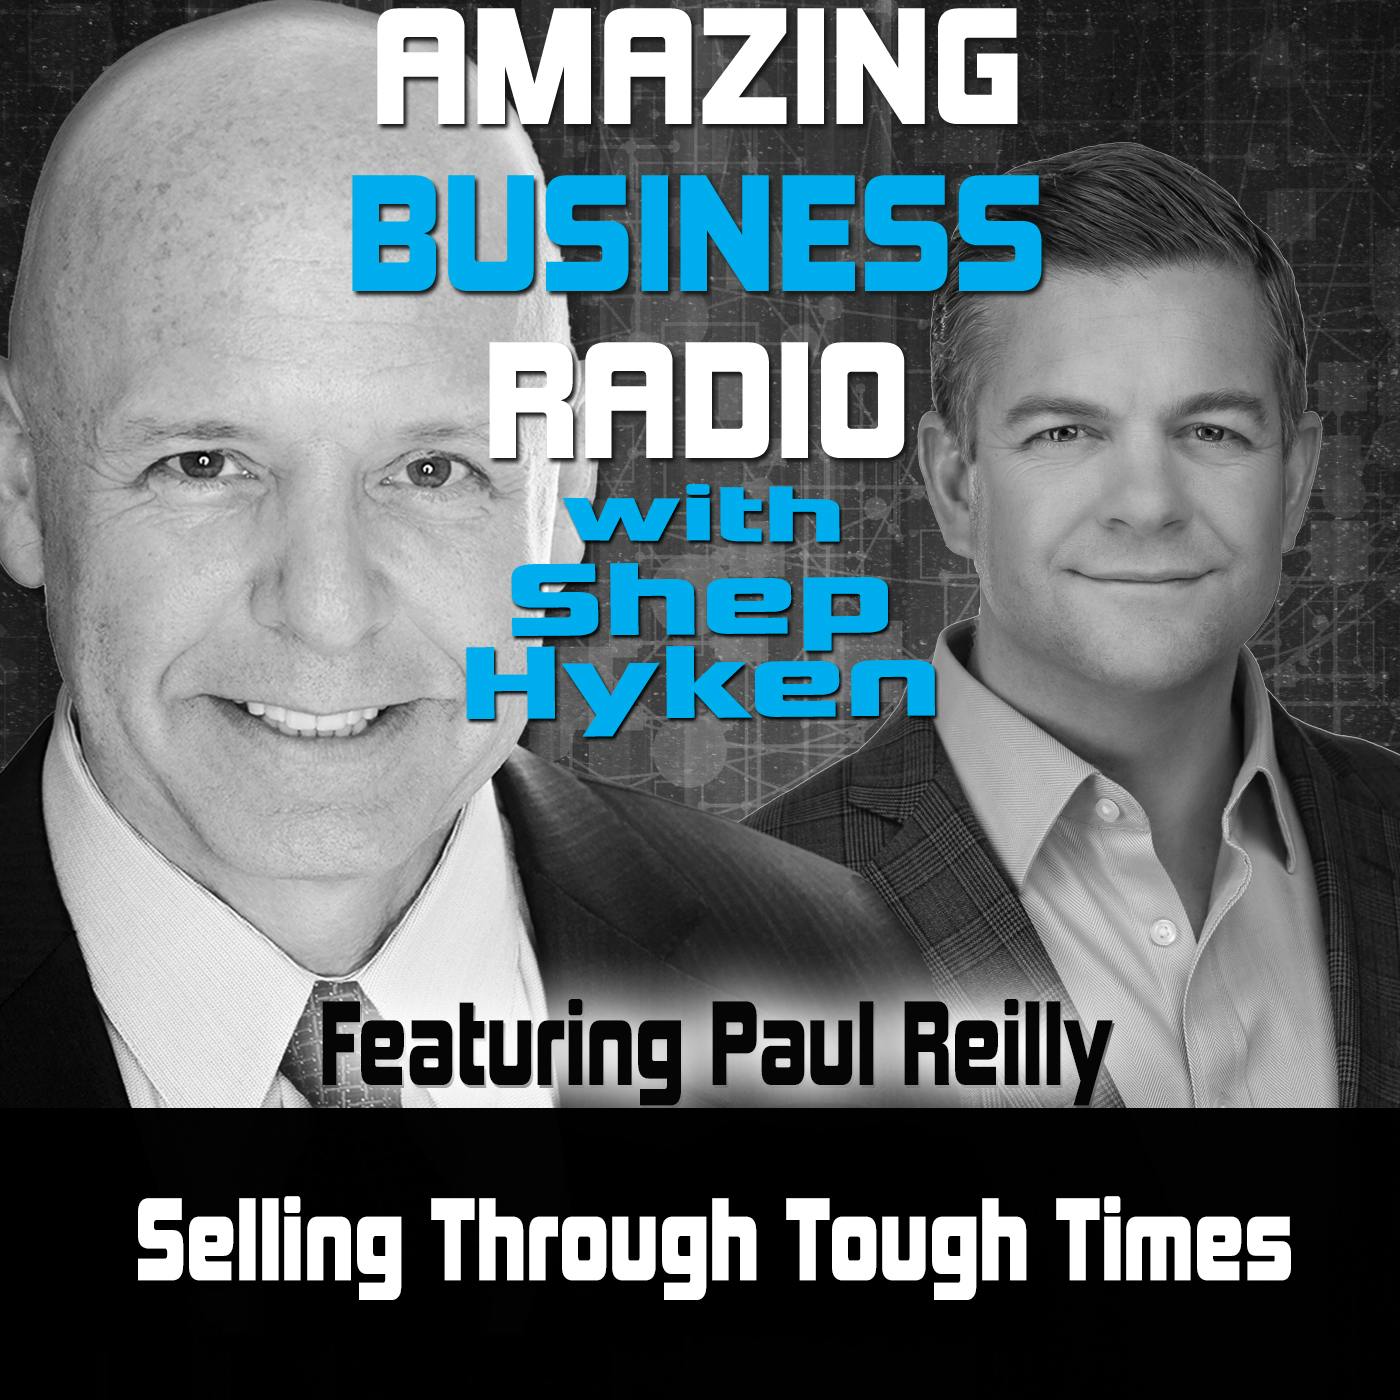 Selling Through Tough Times Featuring Paul Reilly